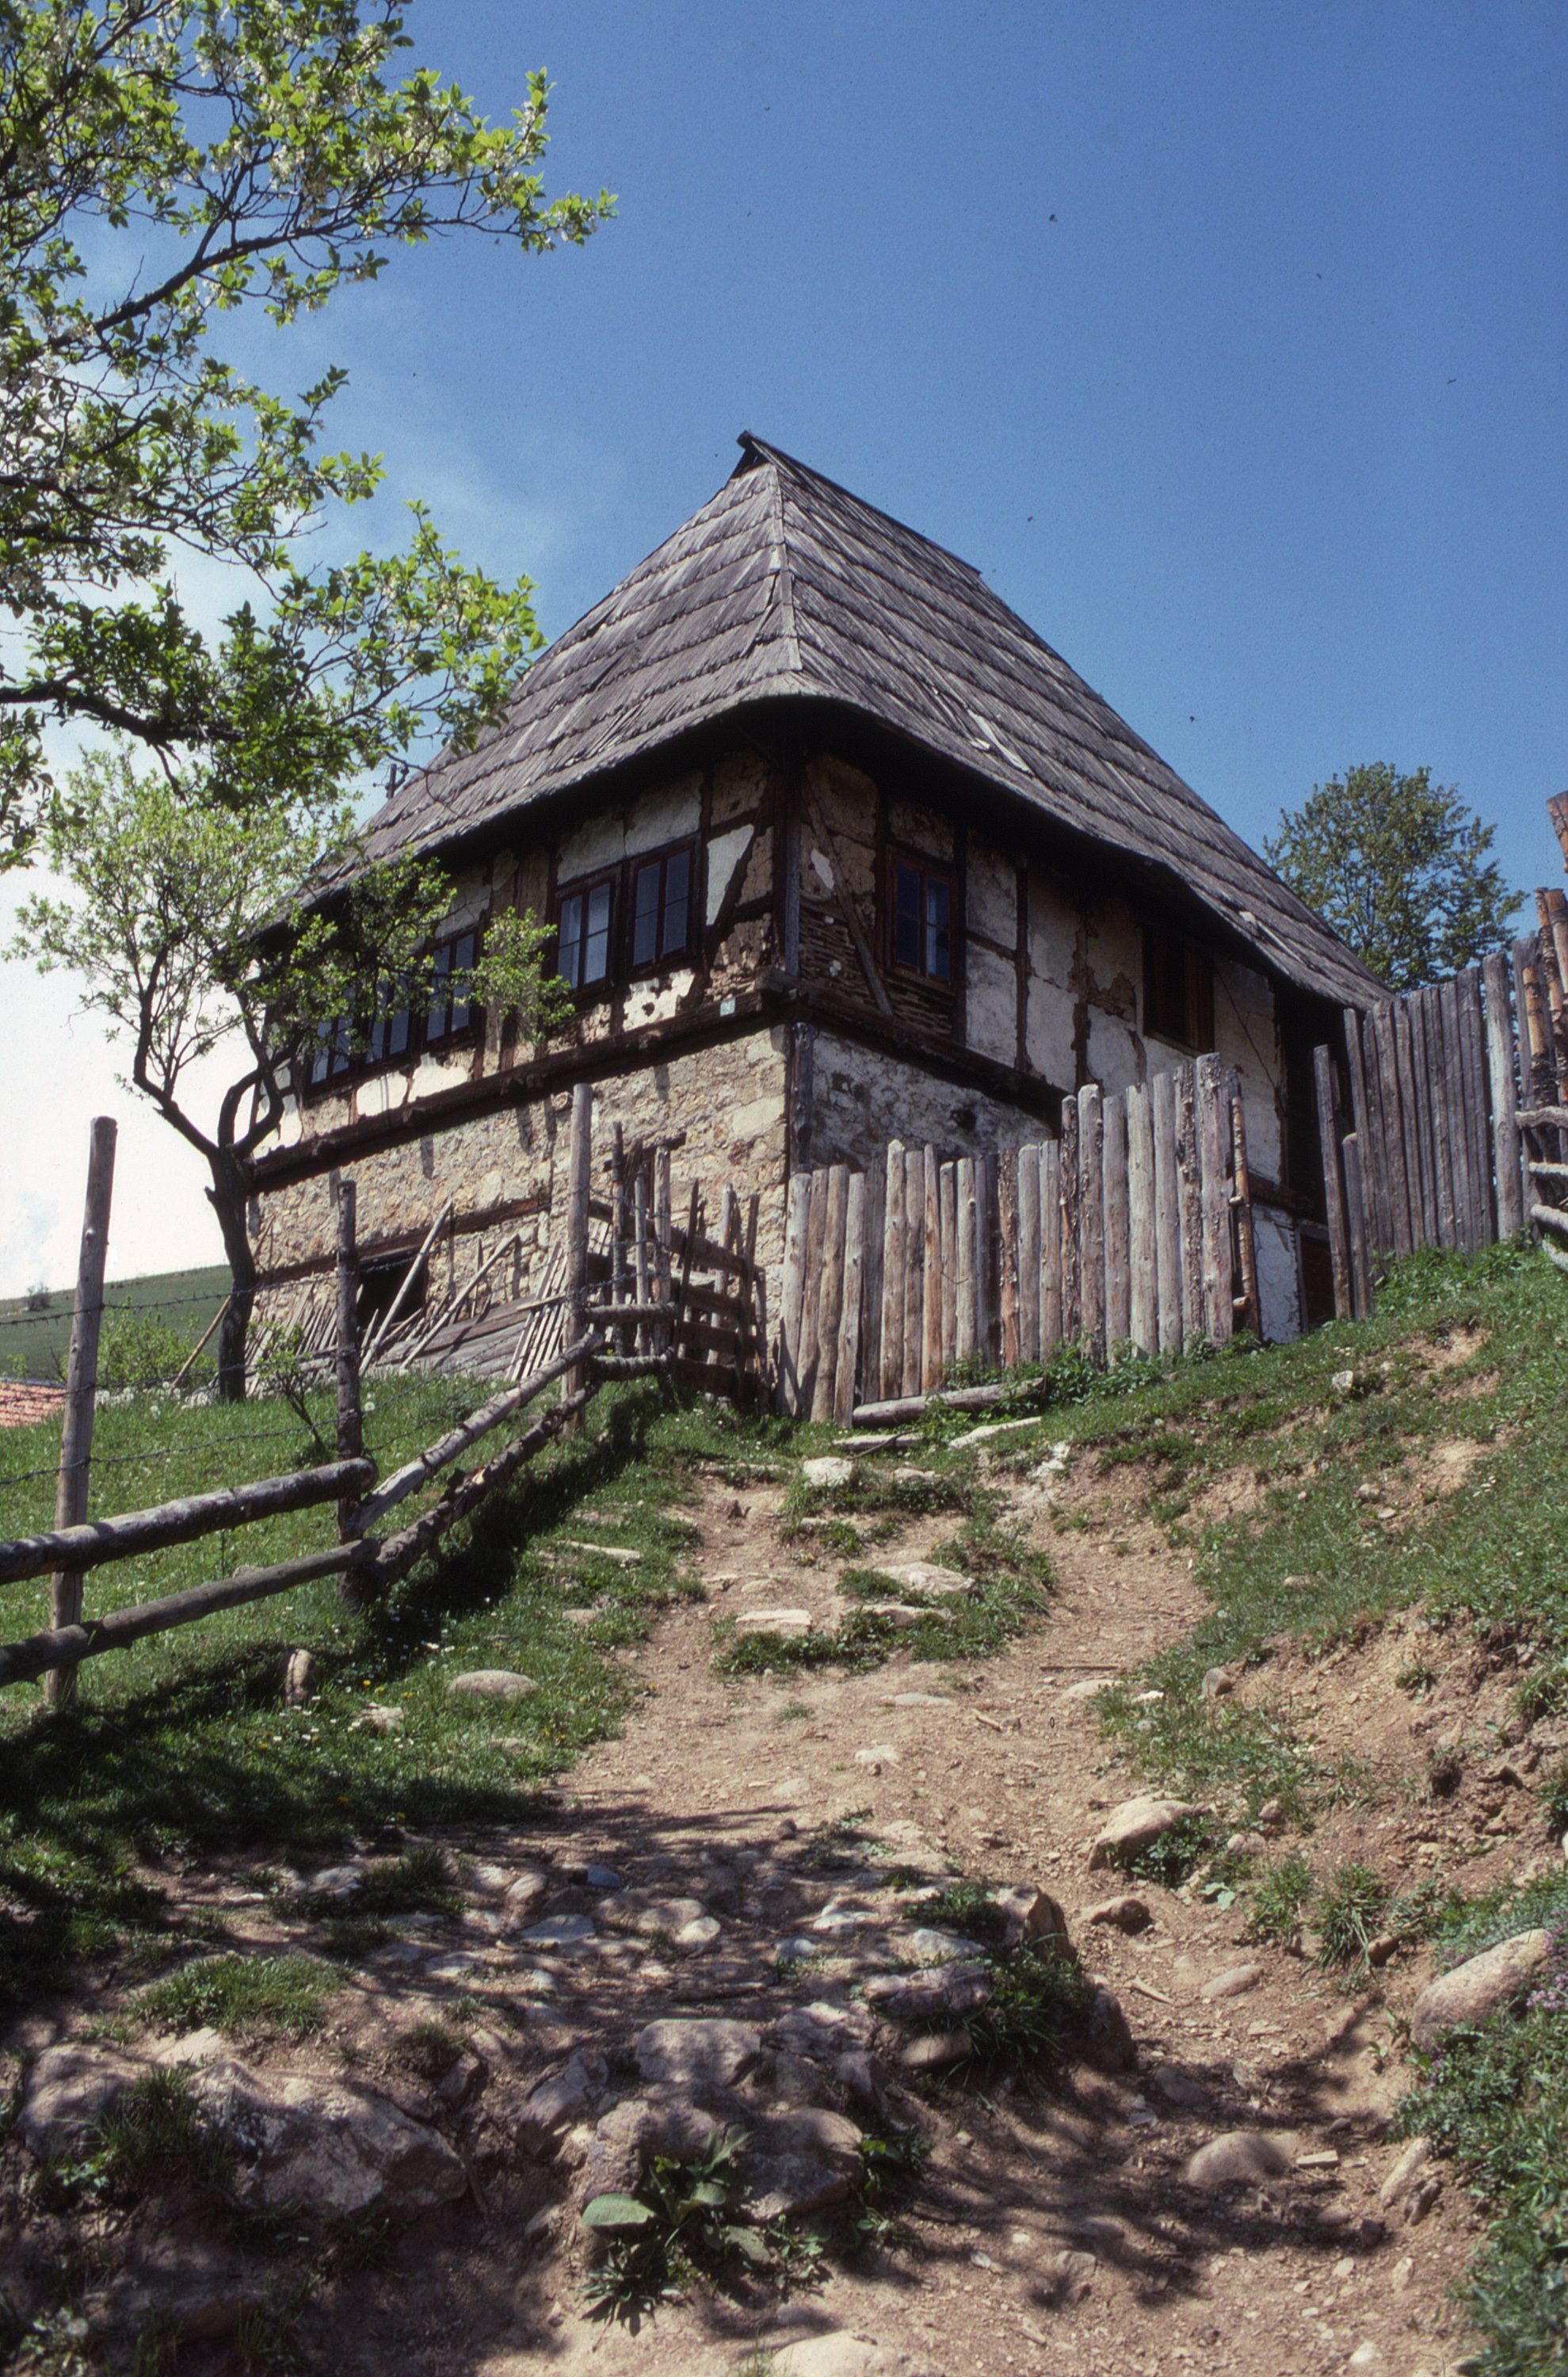 <p>The kuća has the typical roof profile of the dinaric dwelling. The lowest level, built into the sloping terrain was constructed of stone walls and its interior was divided into separate rooms to store food, tools, and house animals. The upper level was constructed with timber framed walls with wattle and daub infill covered with plaster. The living floor of the house has several windows, evidence of multiple rooms within. The roof was timber framed with wooden shingles.</p>